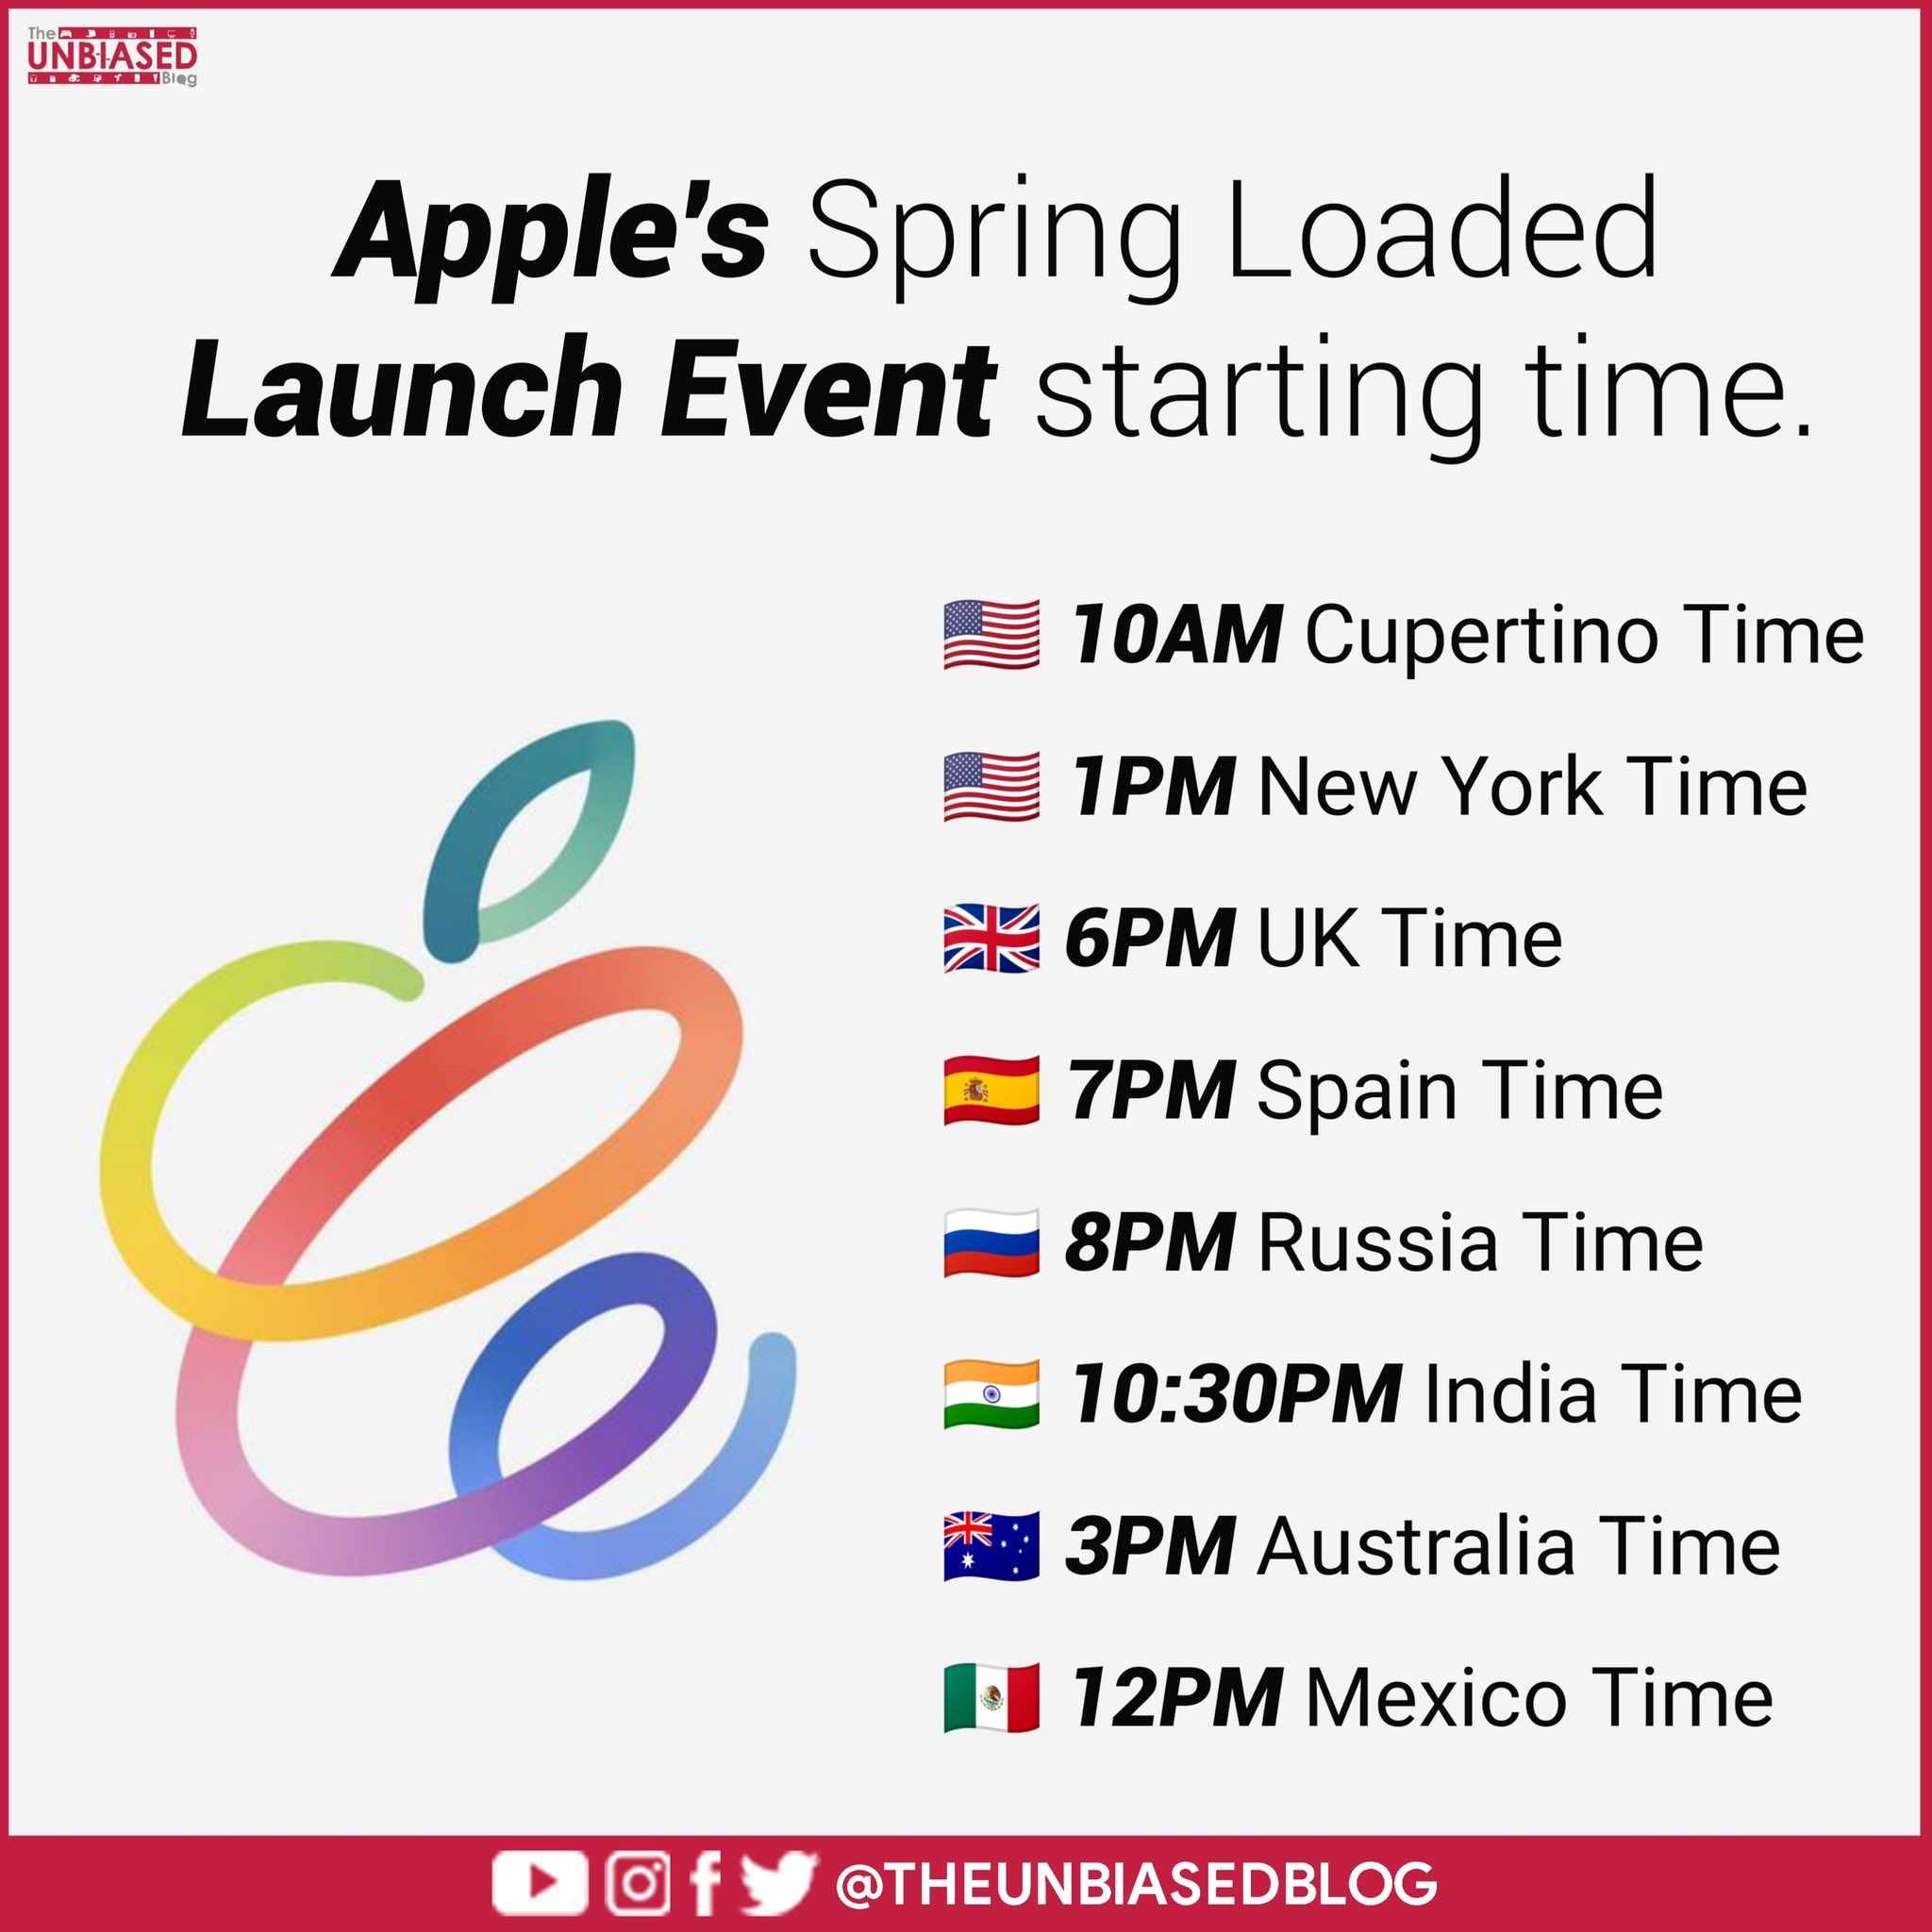 The Unbiased Blog on "Apple's Spring Loaded #AppleEvent starting time. @Apple 🇺🇸 Cupertino Time 🇺🇸 1PM New York Time 🇬🇧 6PM UK Time 🇪🇸 7PM Time 🇷🇺 8PM Russia